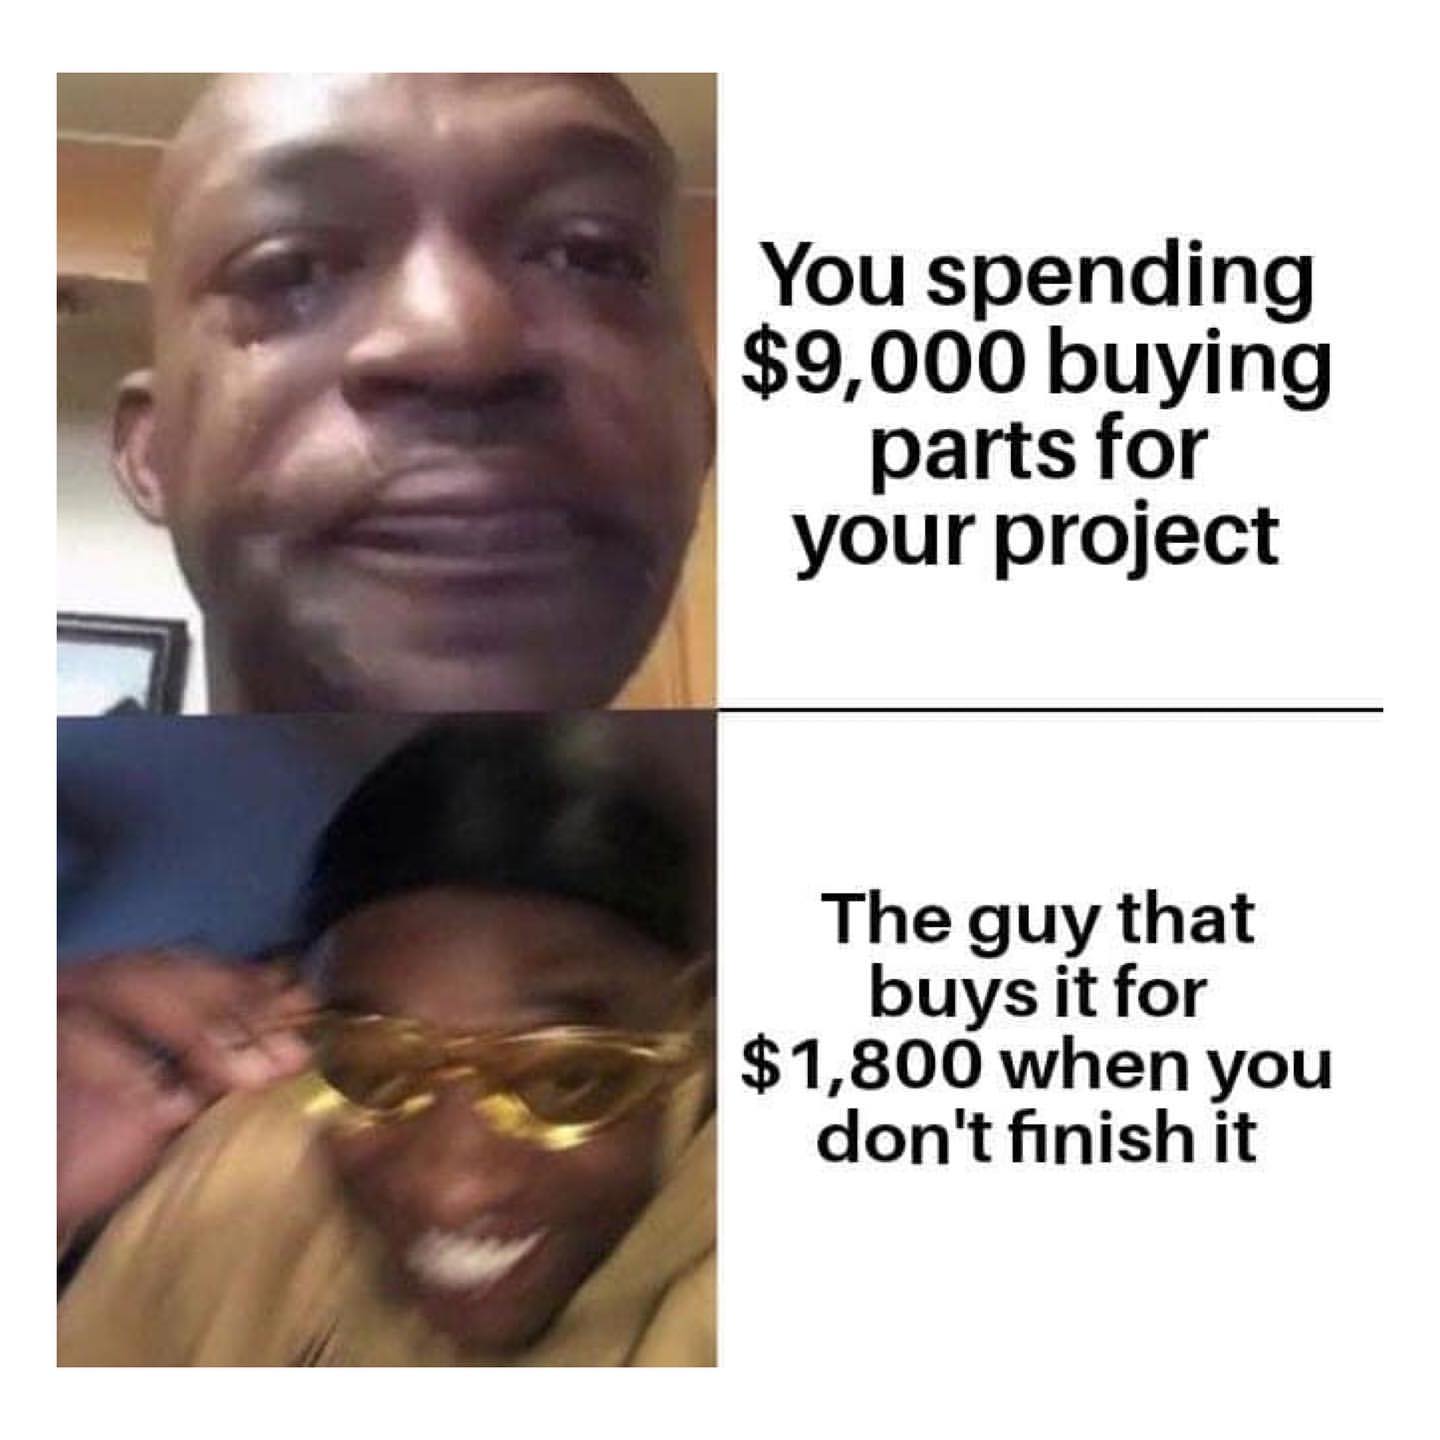 You spending $9,000 buying parts for your project.  The guy that buys it for $1,800 when you don't finish it.